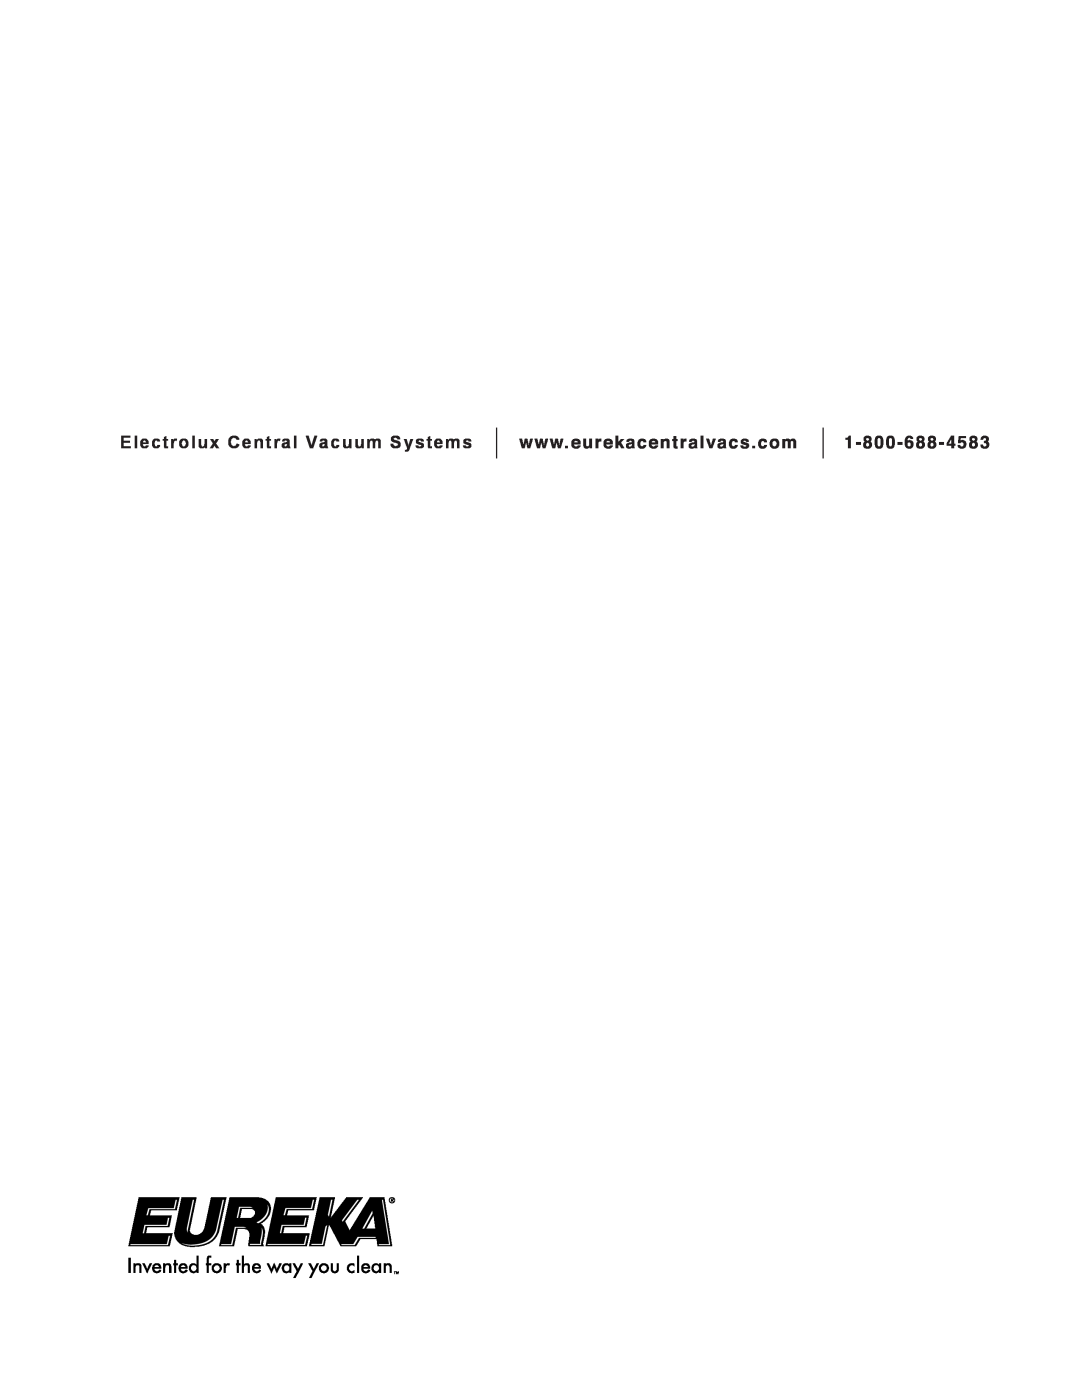 Eureka Central Vacuum Cleaner manual Electrolux Central Vacuum Systems 